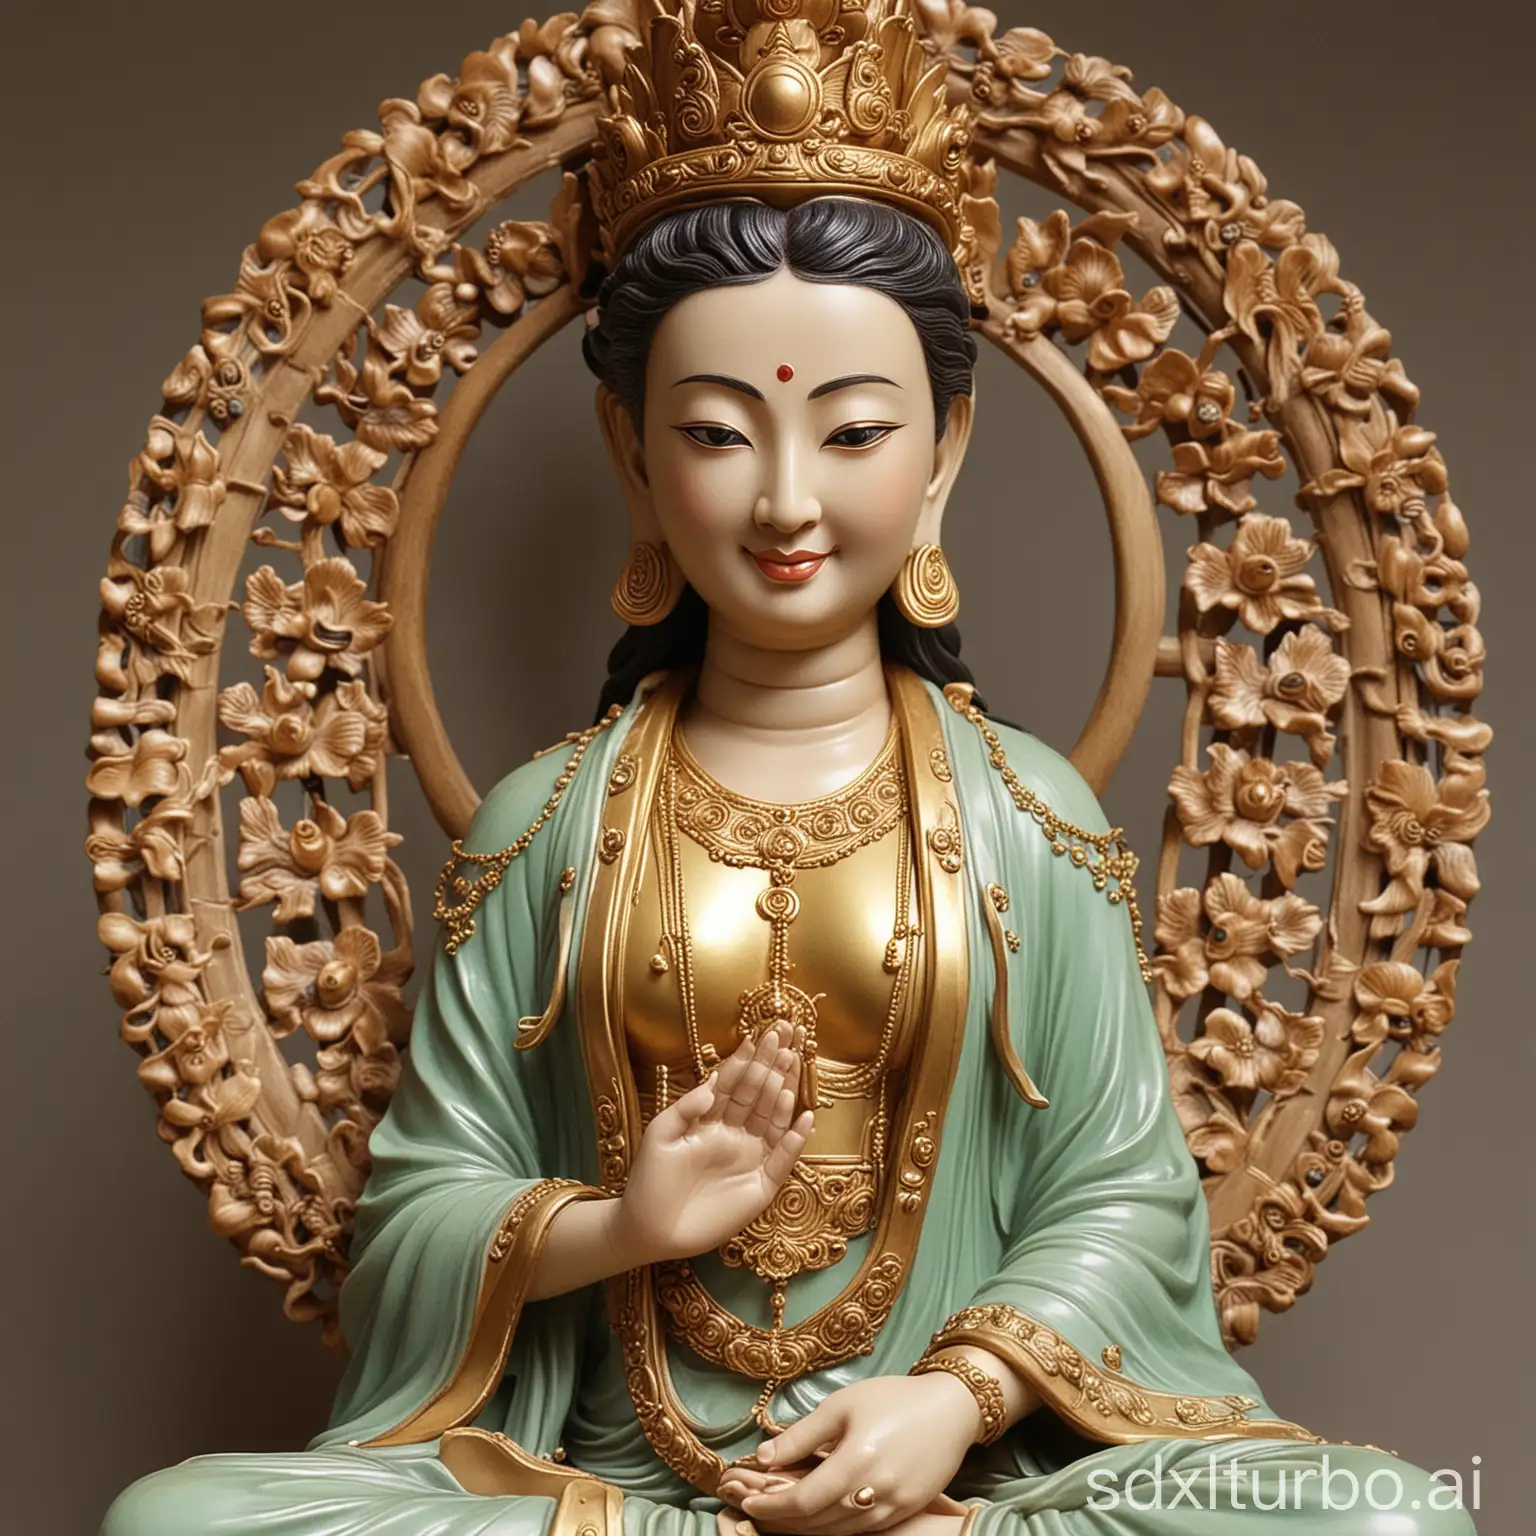 Tranquil Guanyin Bodhisattva with Serene Smile and Compassionate 